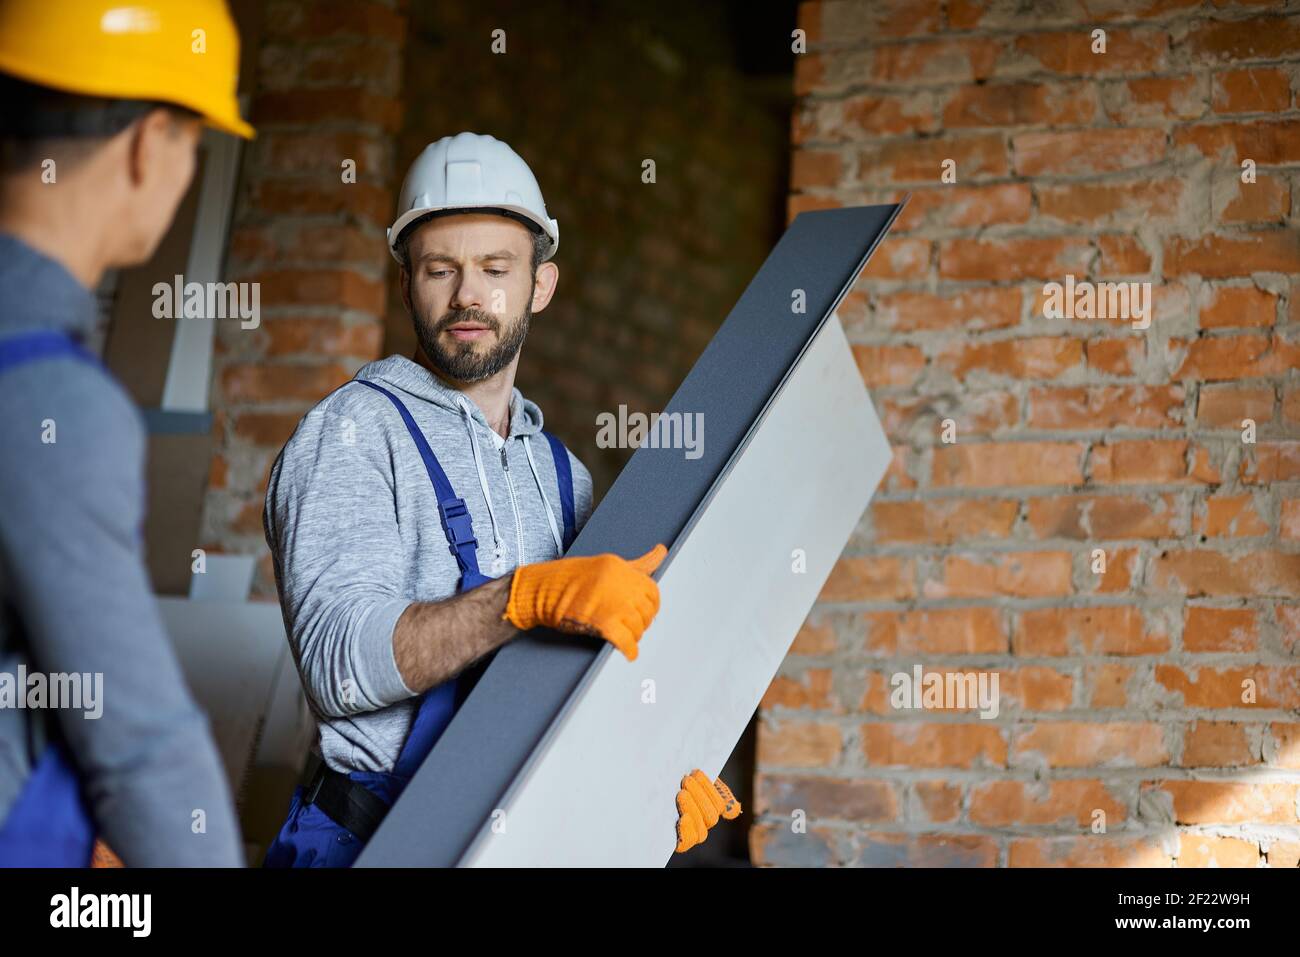 Confident young male builders wearing hard hats looking focused, holding metal stud for drywall while working together at construction site. Building house, profession, teamwork concept Stock Photo